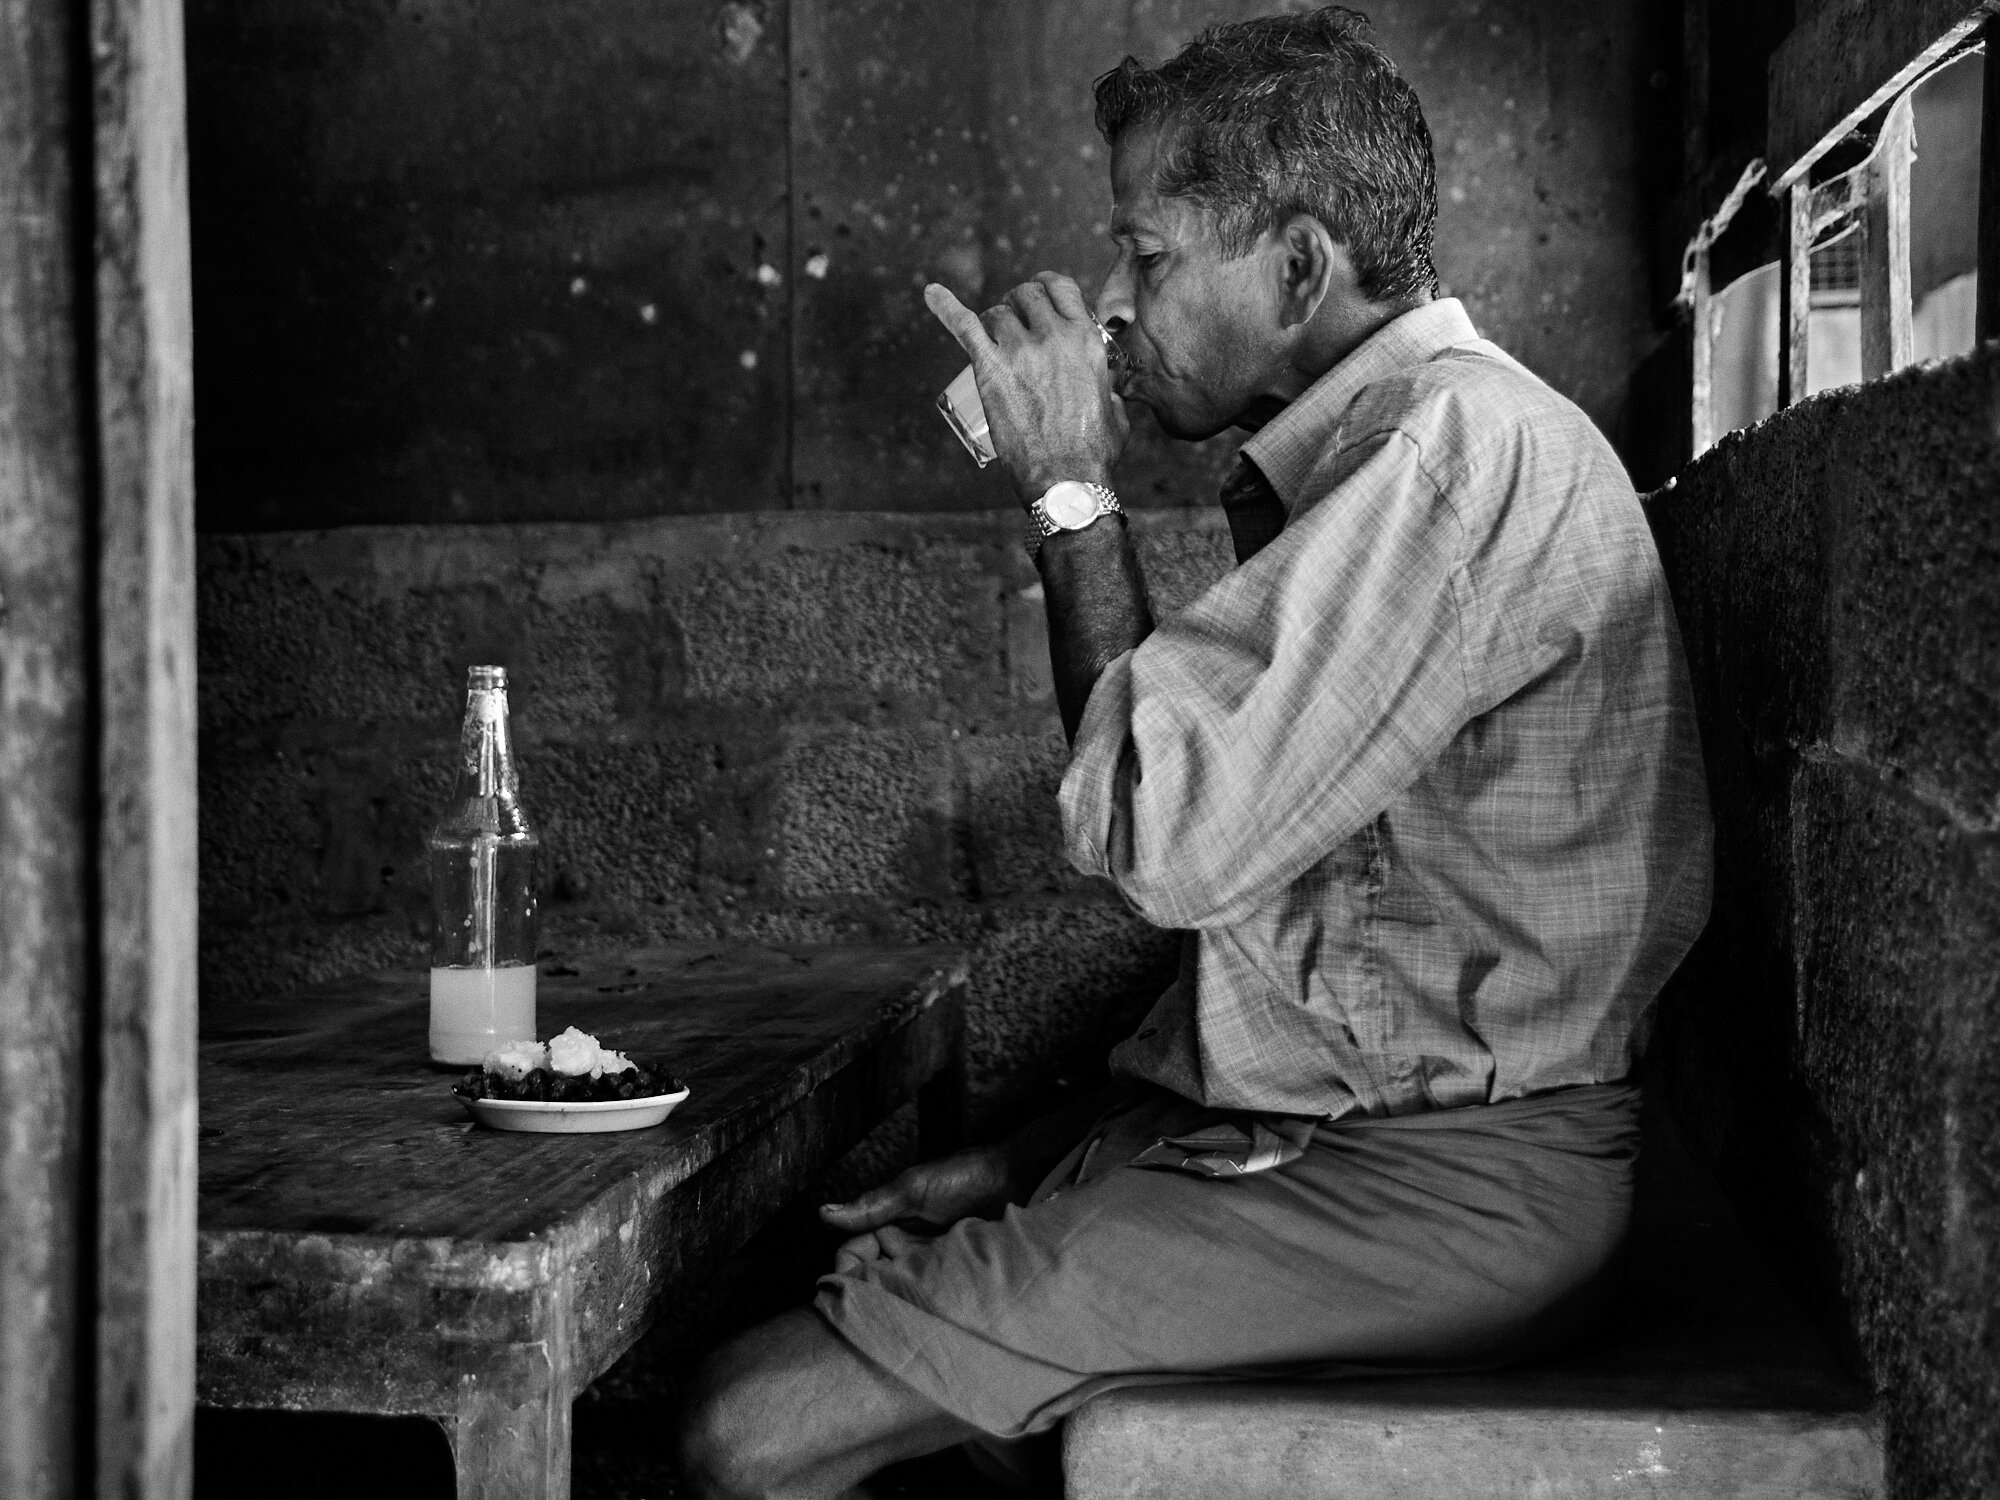  A villager enjoying a bottle of fresh toddy at a local toddy shop in Alappuzha, Kerala. 